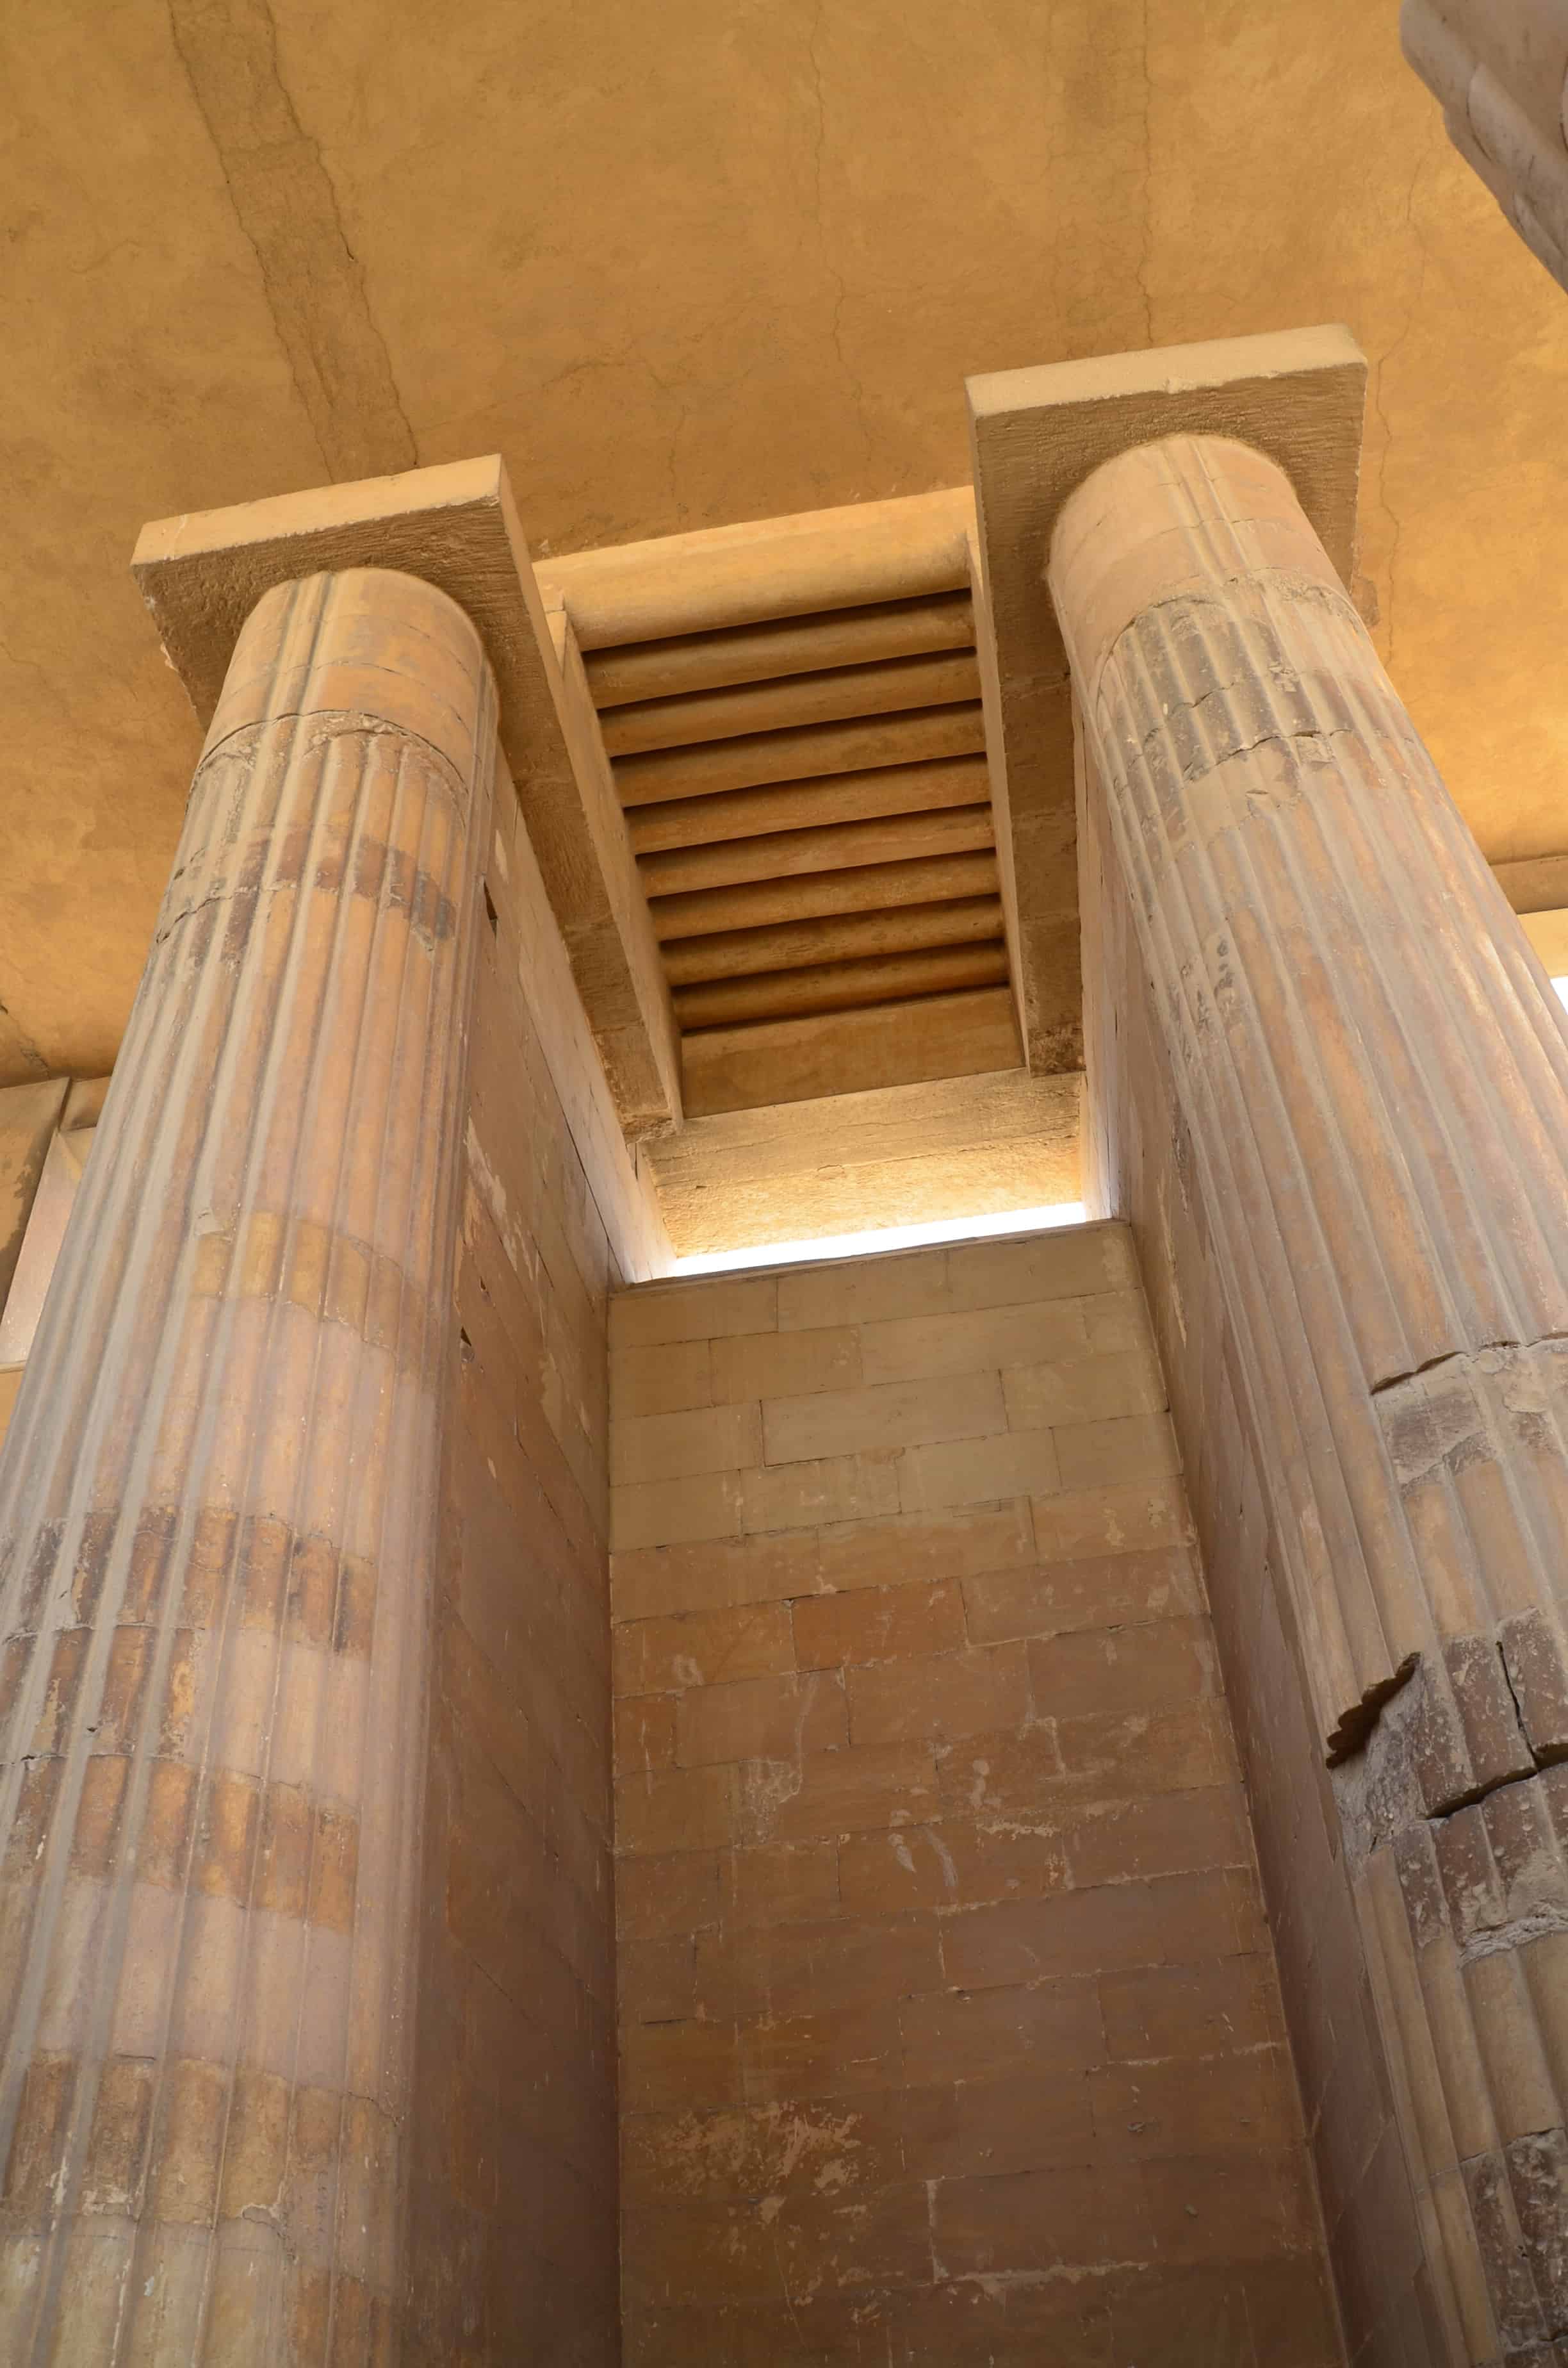 Looking up at the columns in the colonnaded entrance of the Step Pyramid of Djoser at Saqqara, Egypt